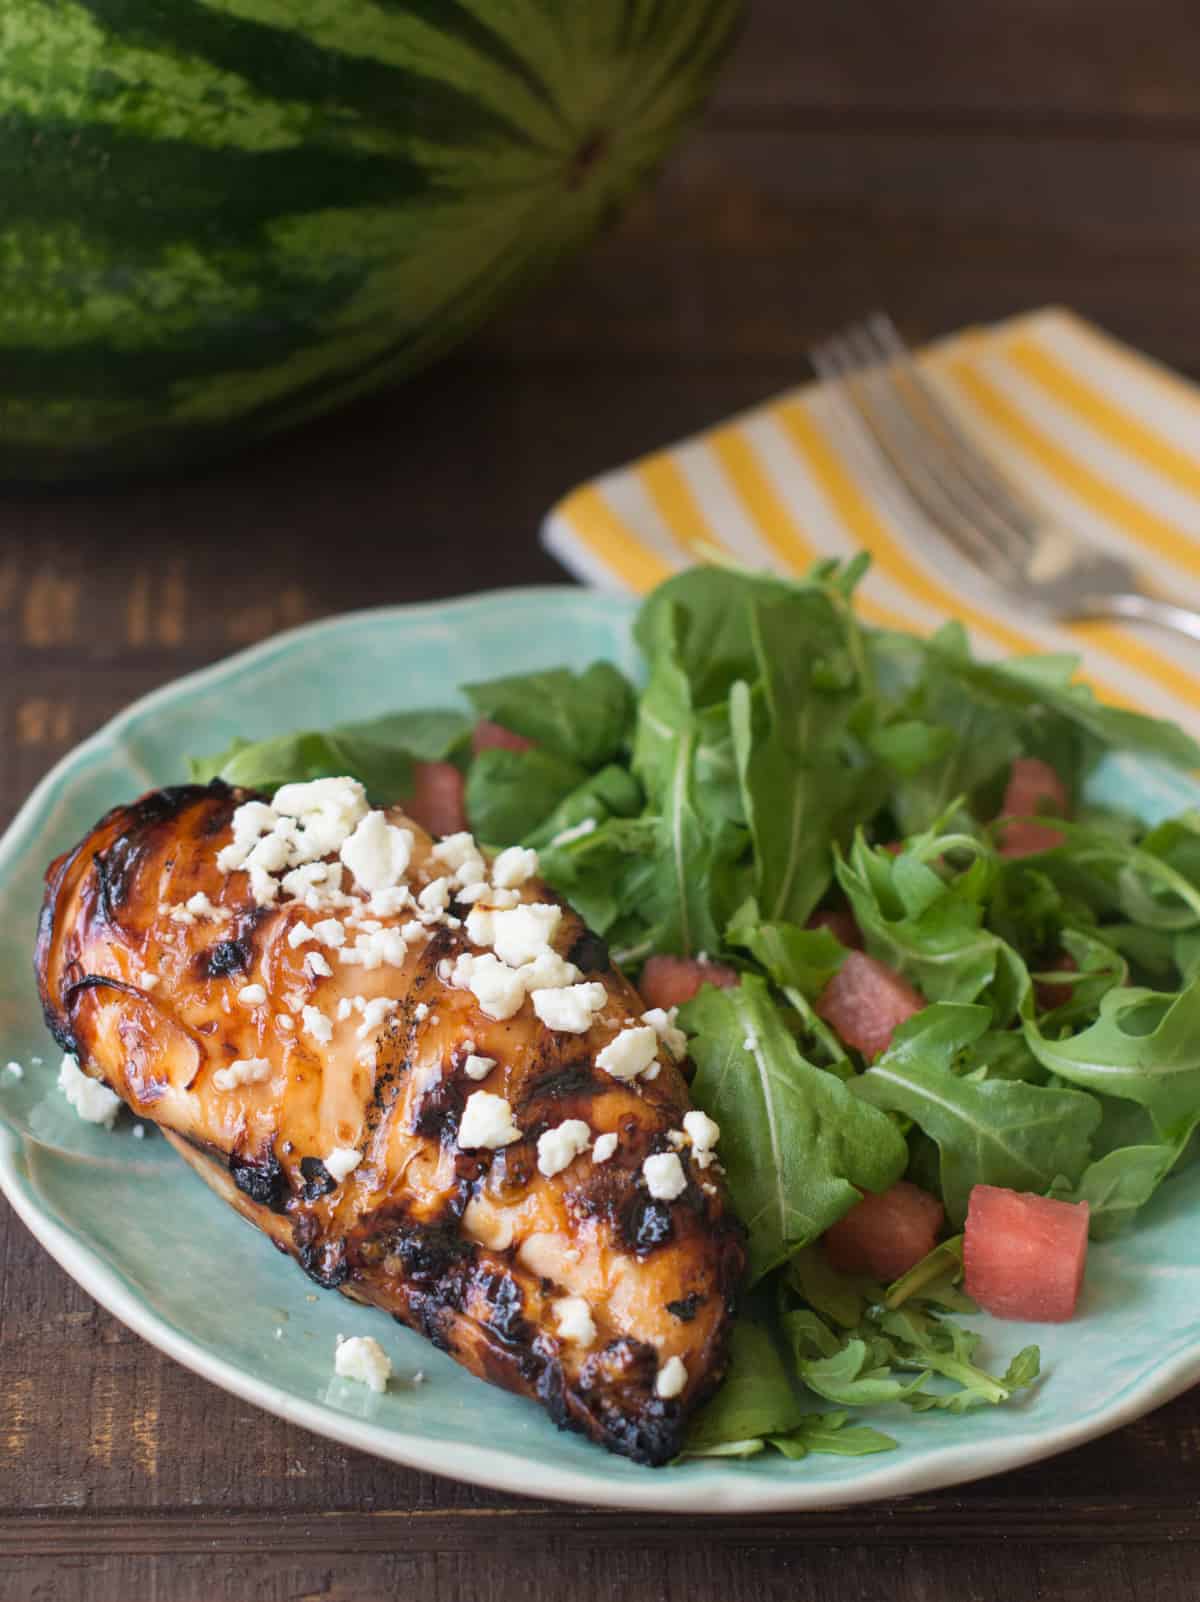 Feta over grilled chicken.